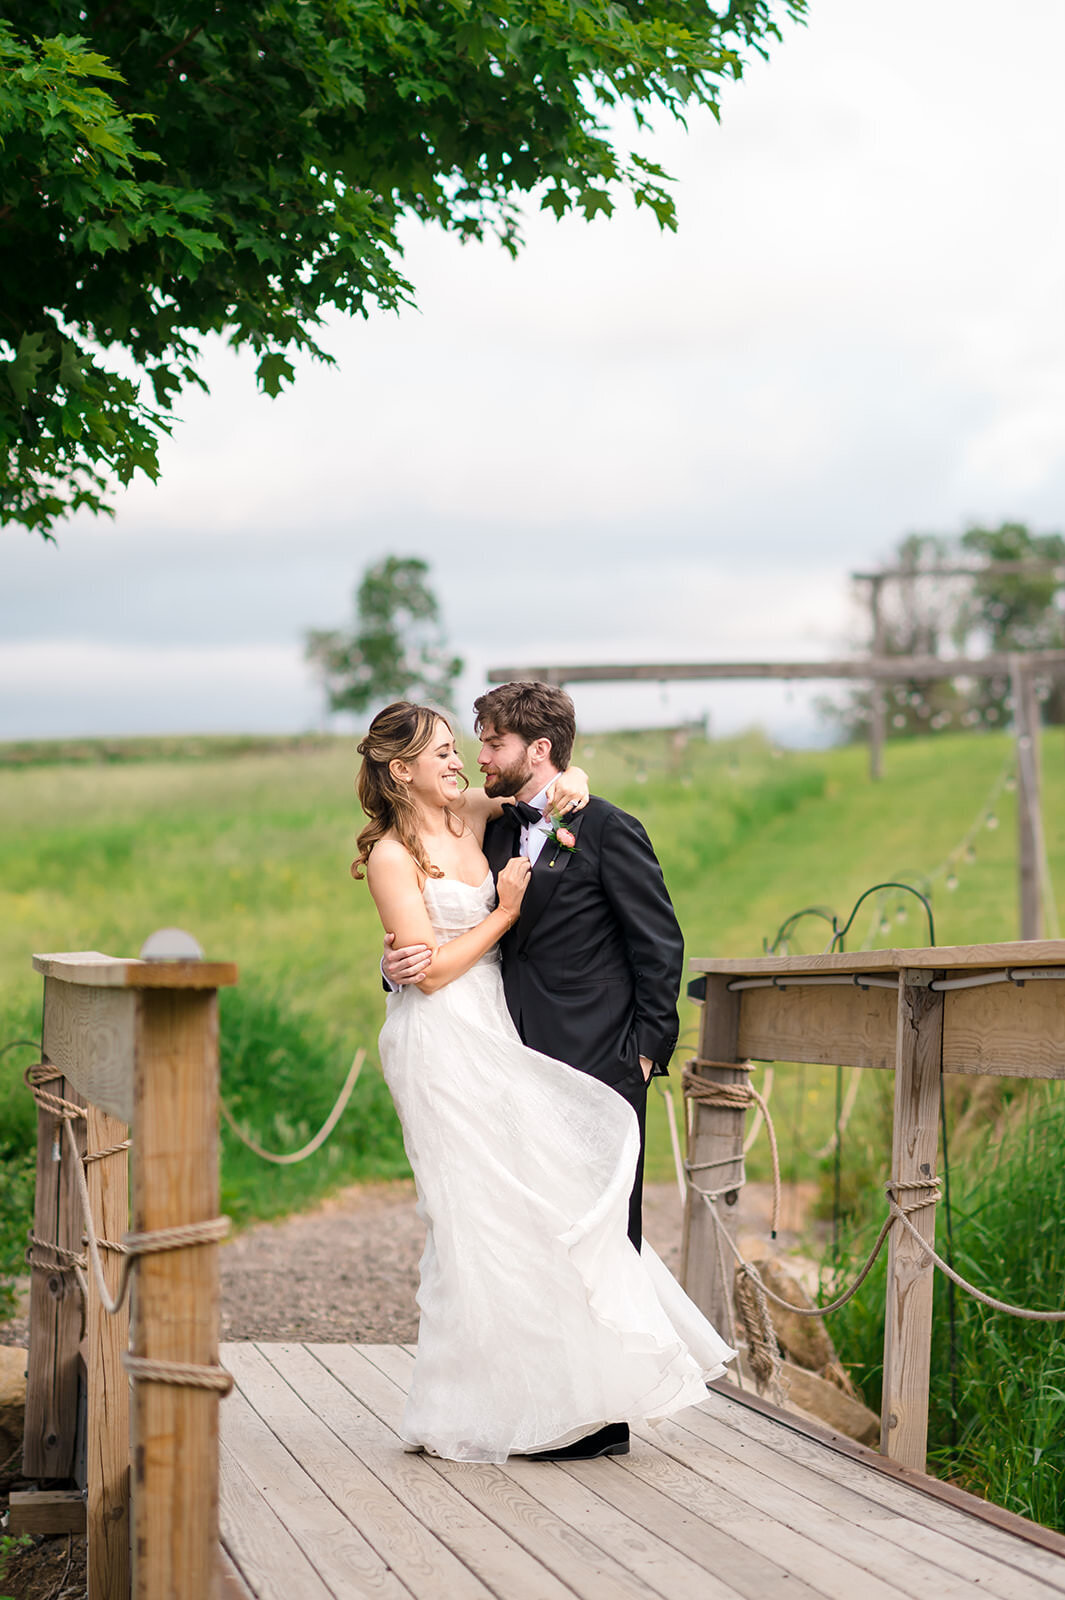 A bride and groom share a laugh on a wooden bridge in a pastoral setting, with the bride playfully grabbing the groom's lapel, surrounded by lush greenery and open skies